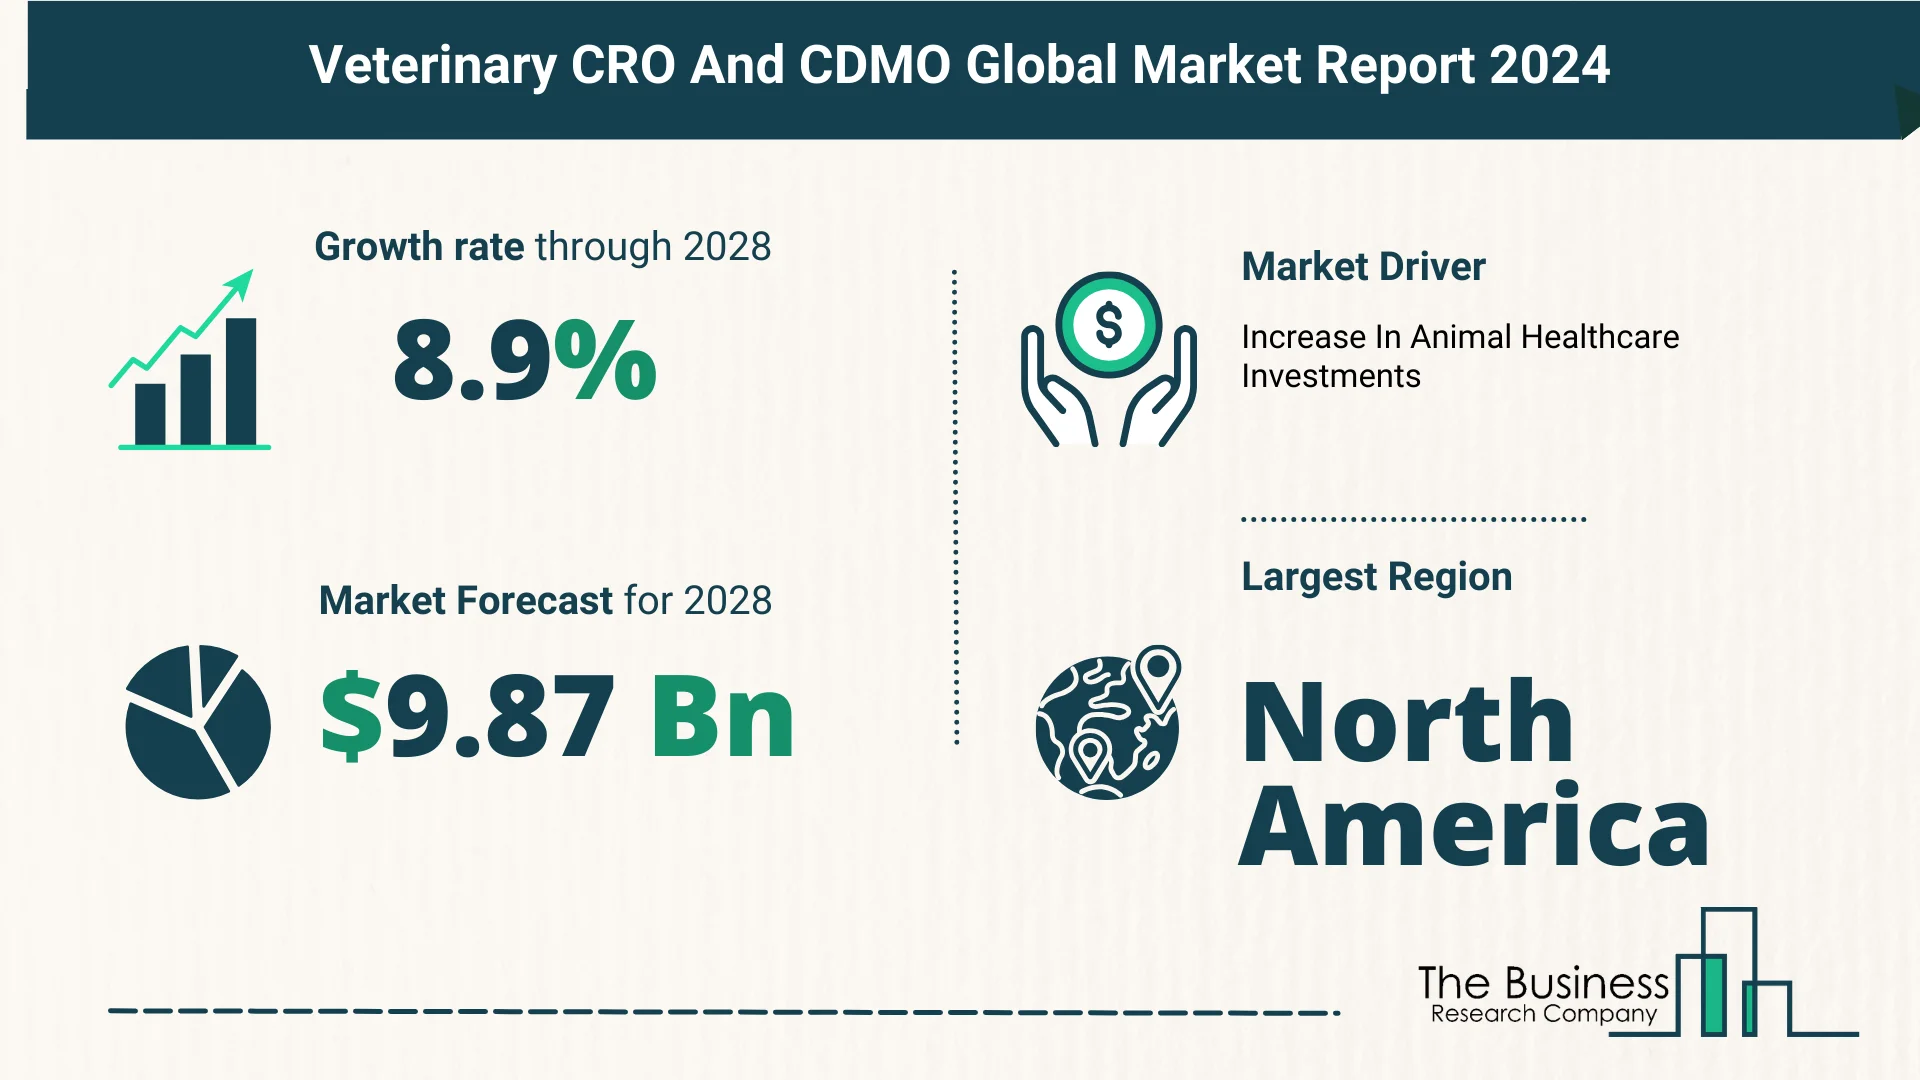 Key Trends And Drivers In The Veterinary CRO And CDMO Market 2024